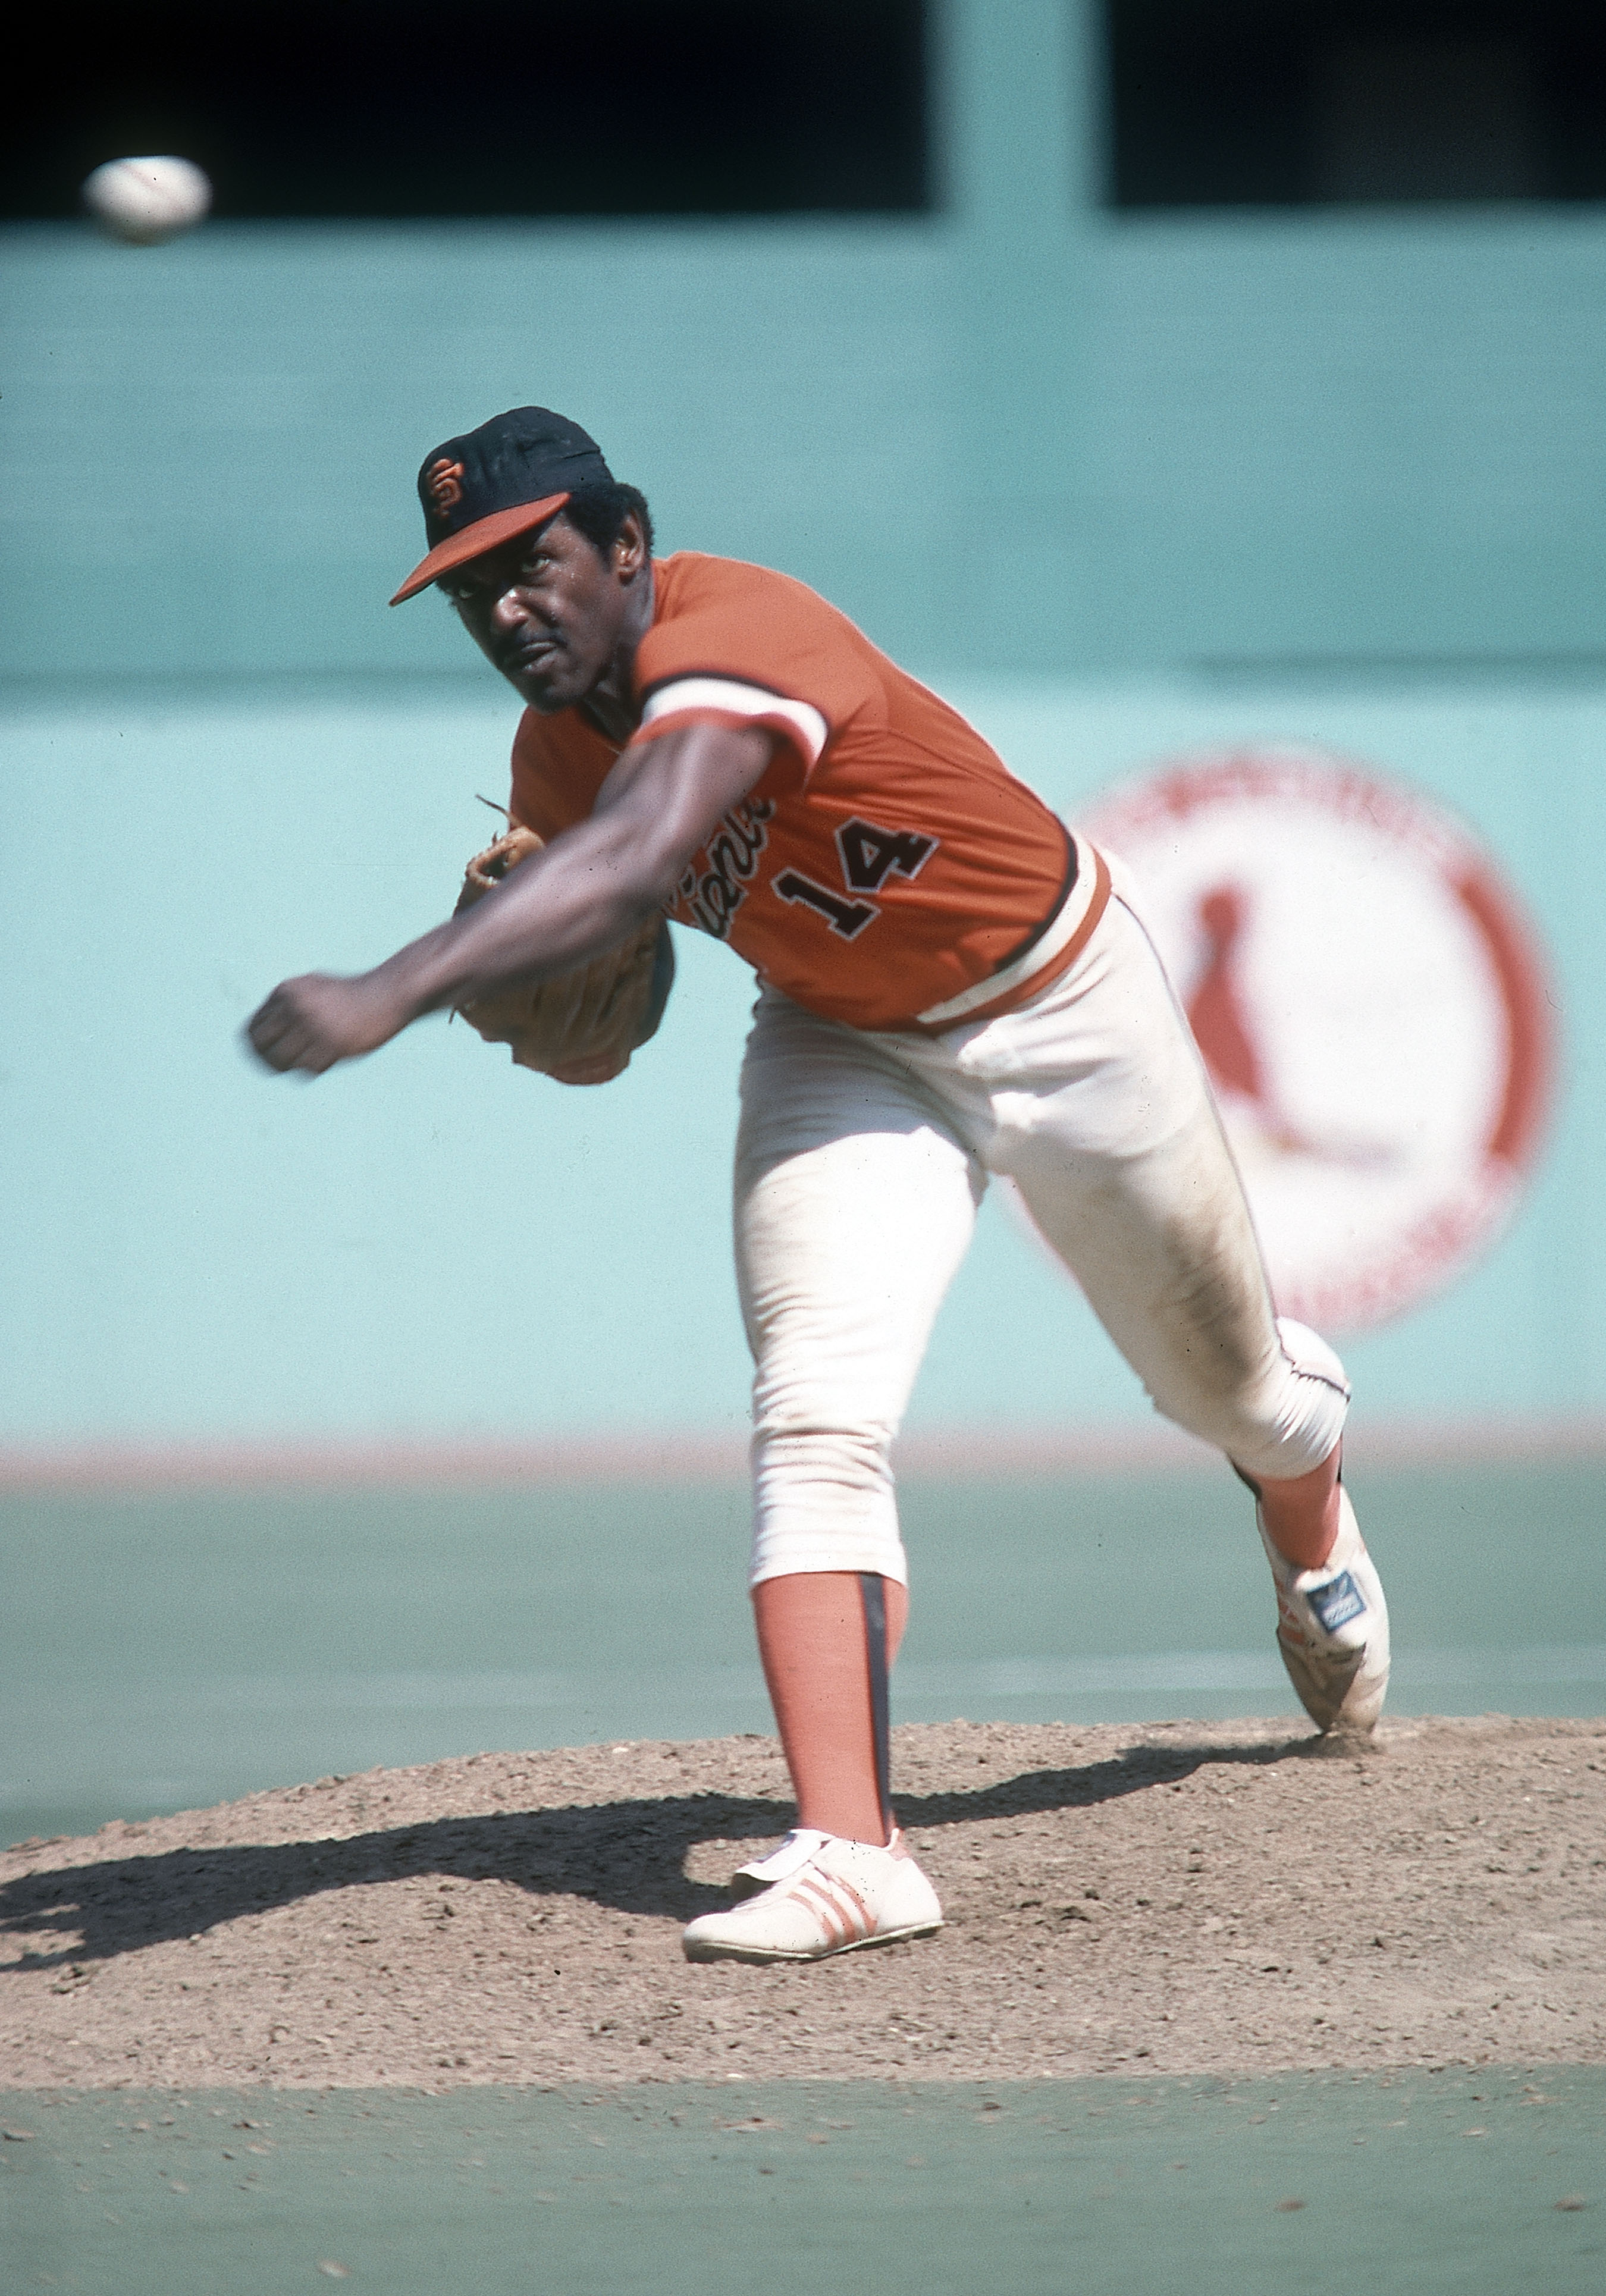 Vida Blue - Oakland A's - Baseball's Most Exciting Young Pitcher